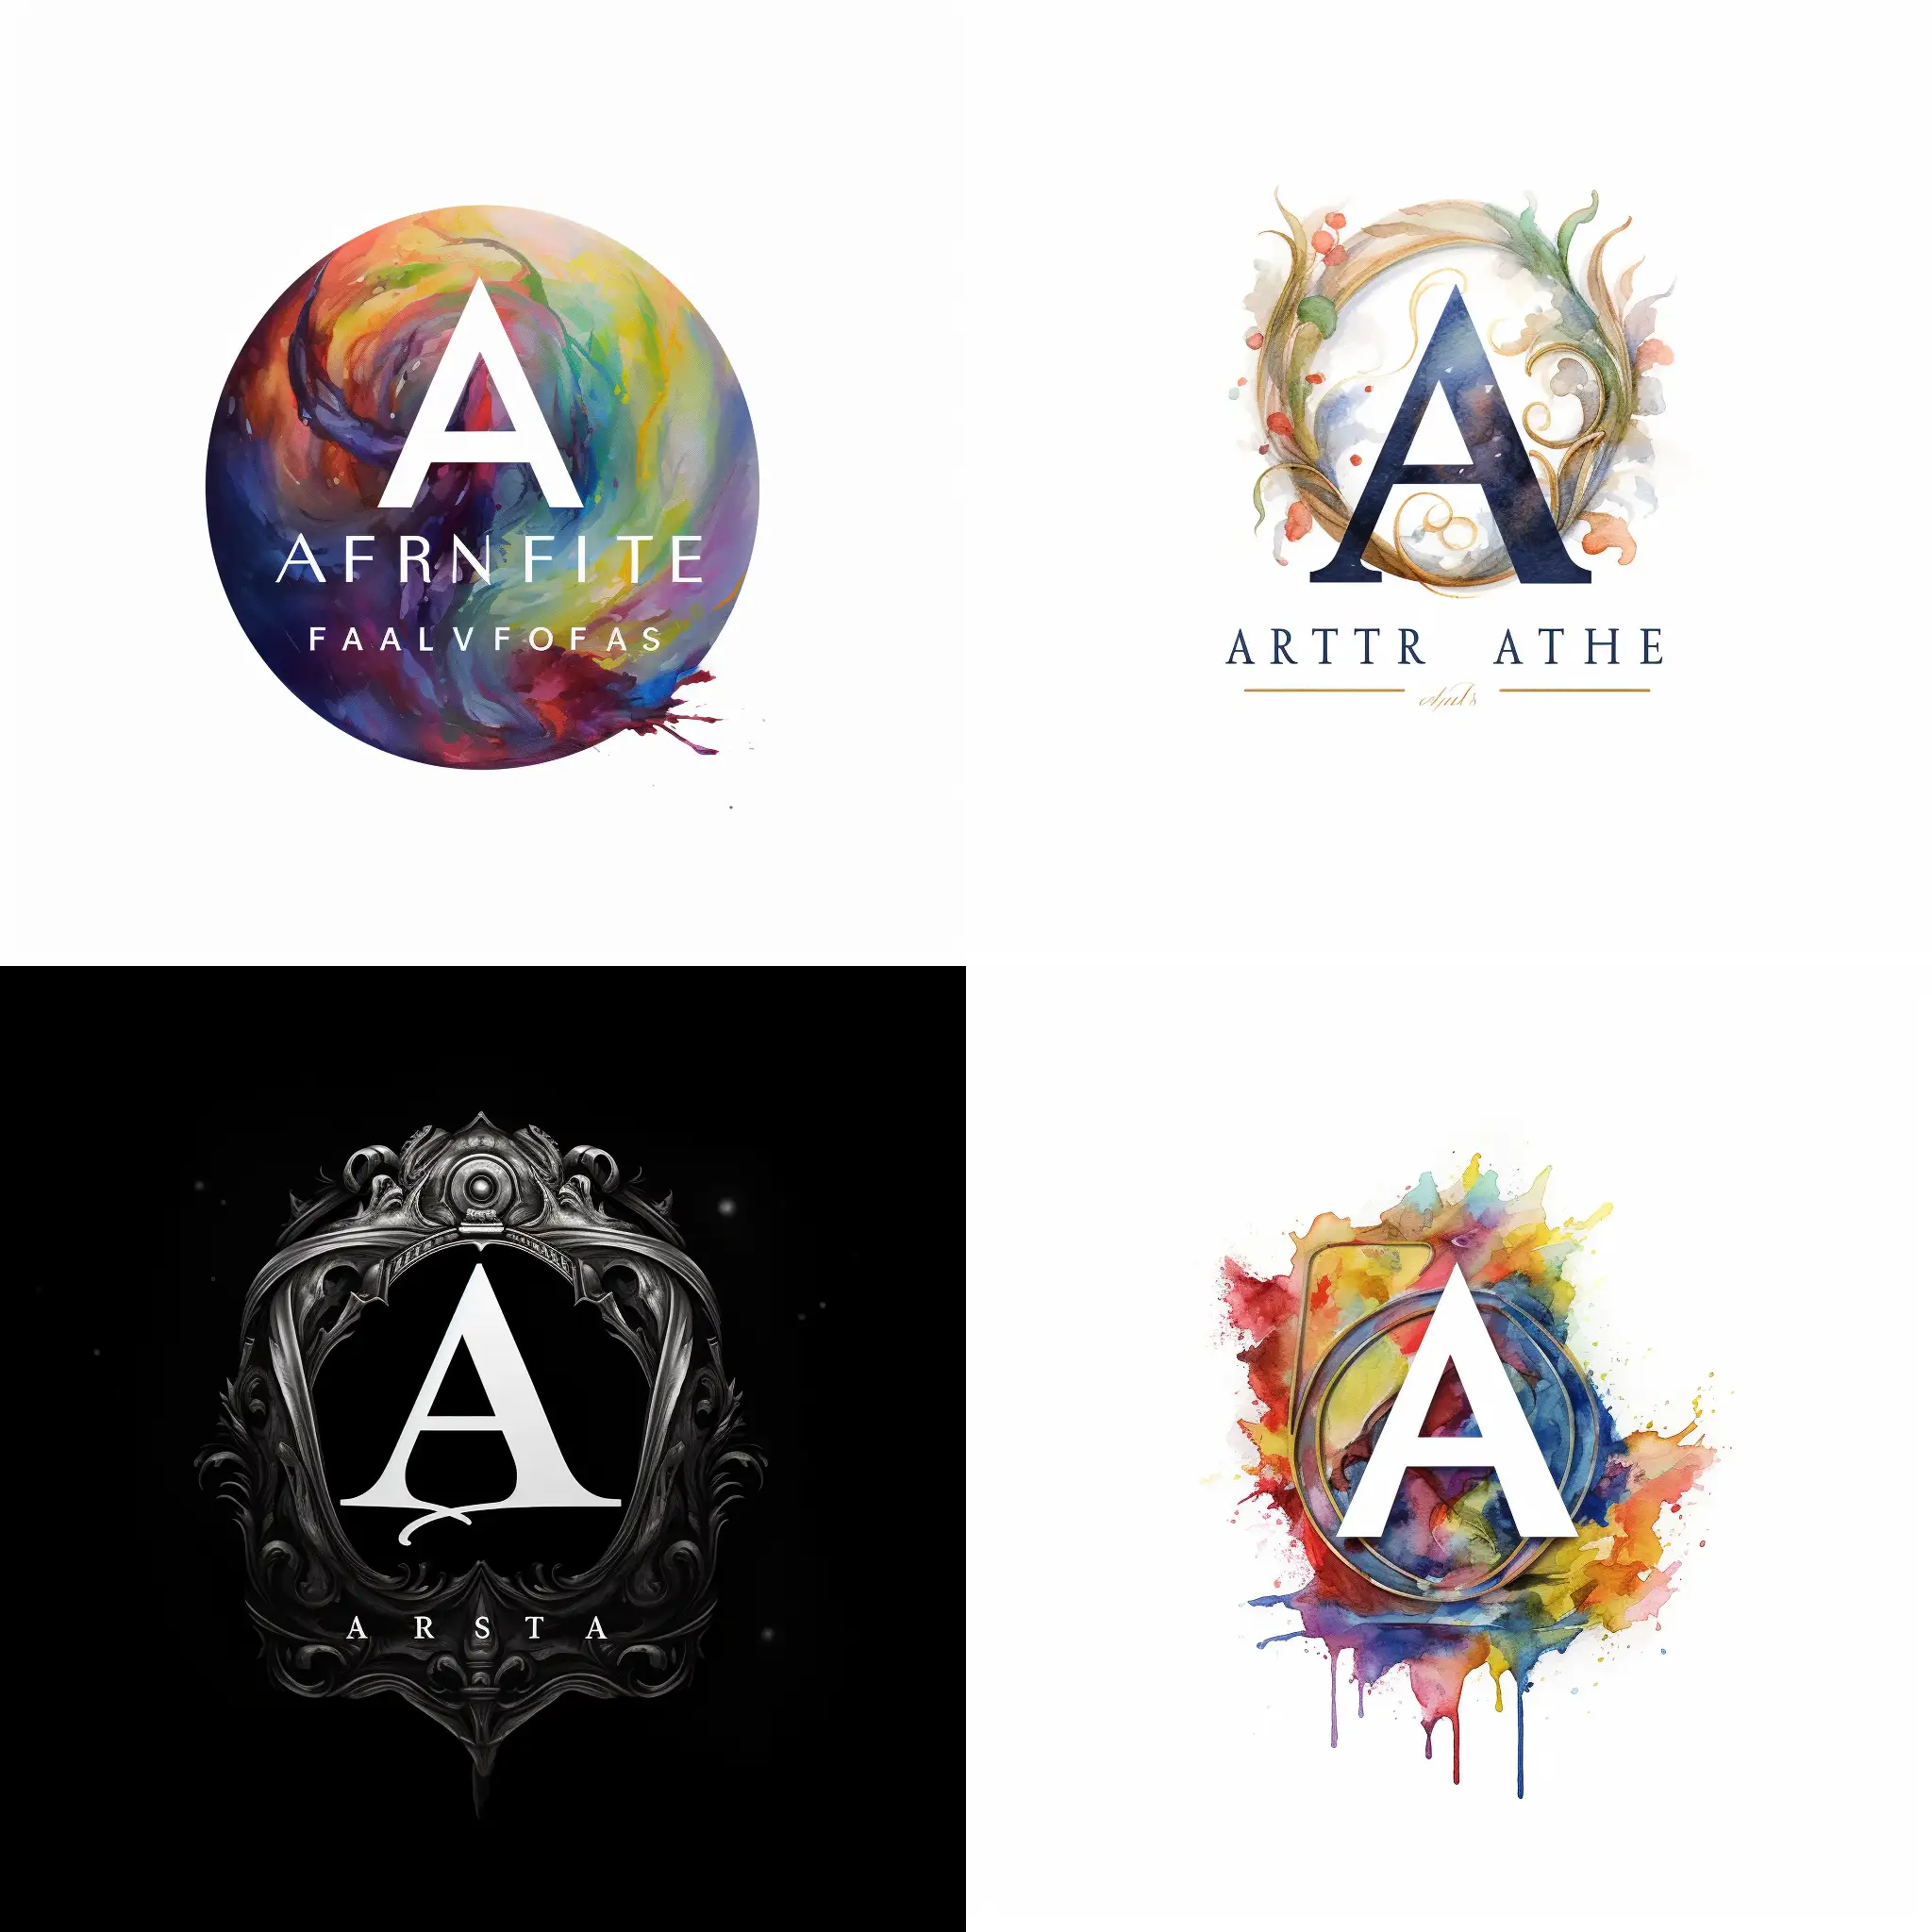 Logo for an art studio producing oil paintings involving the letter A